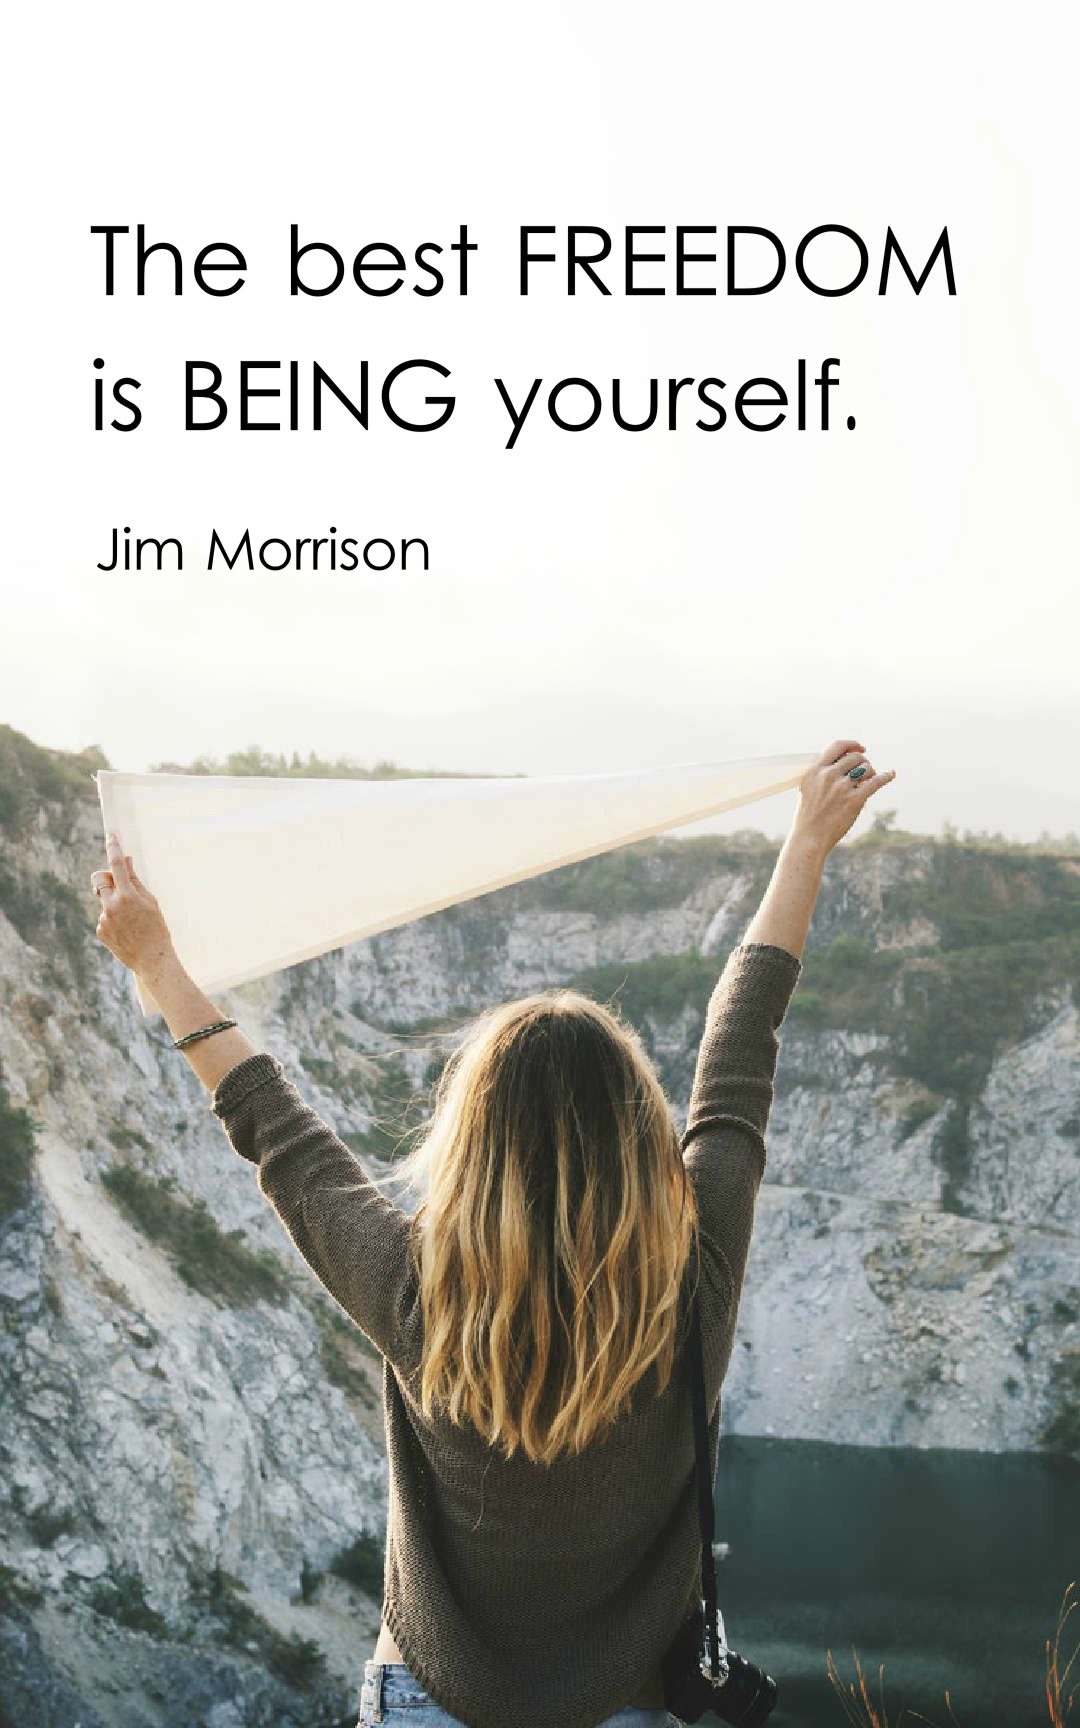 The best freedom is being yourself.